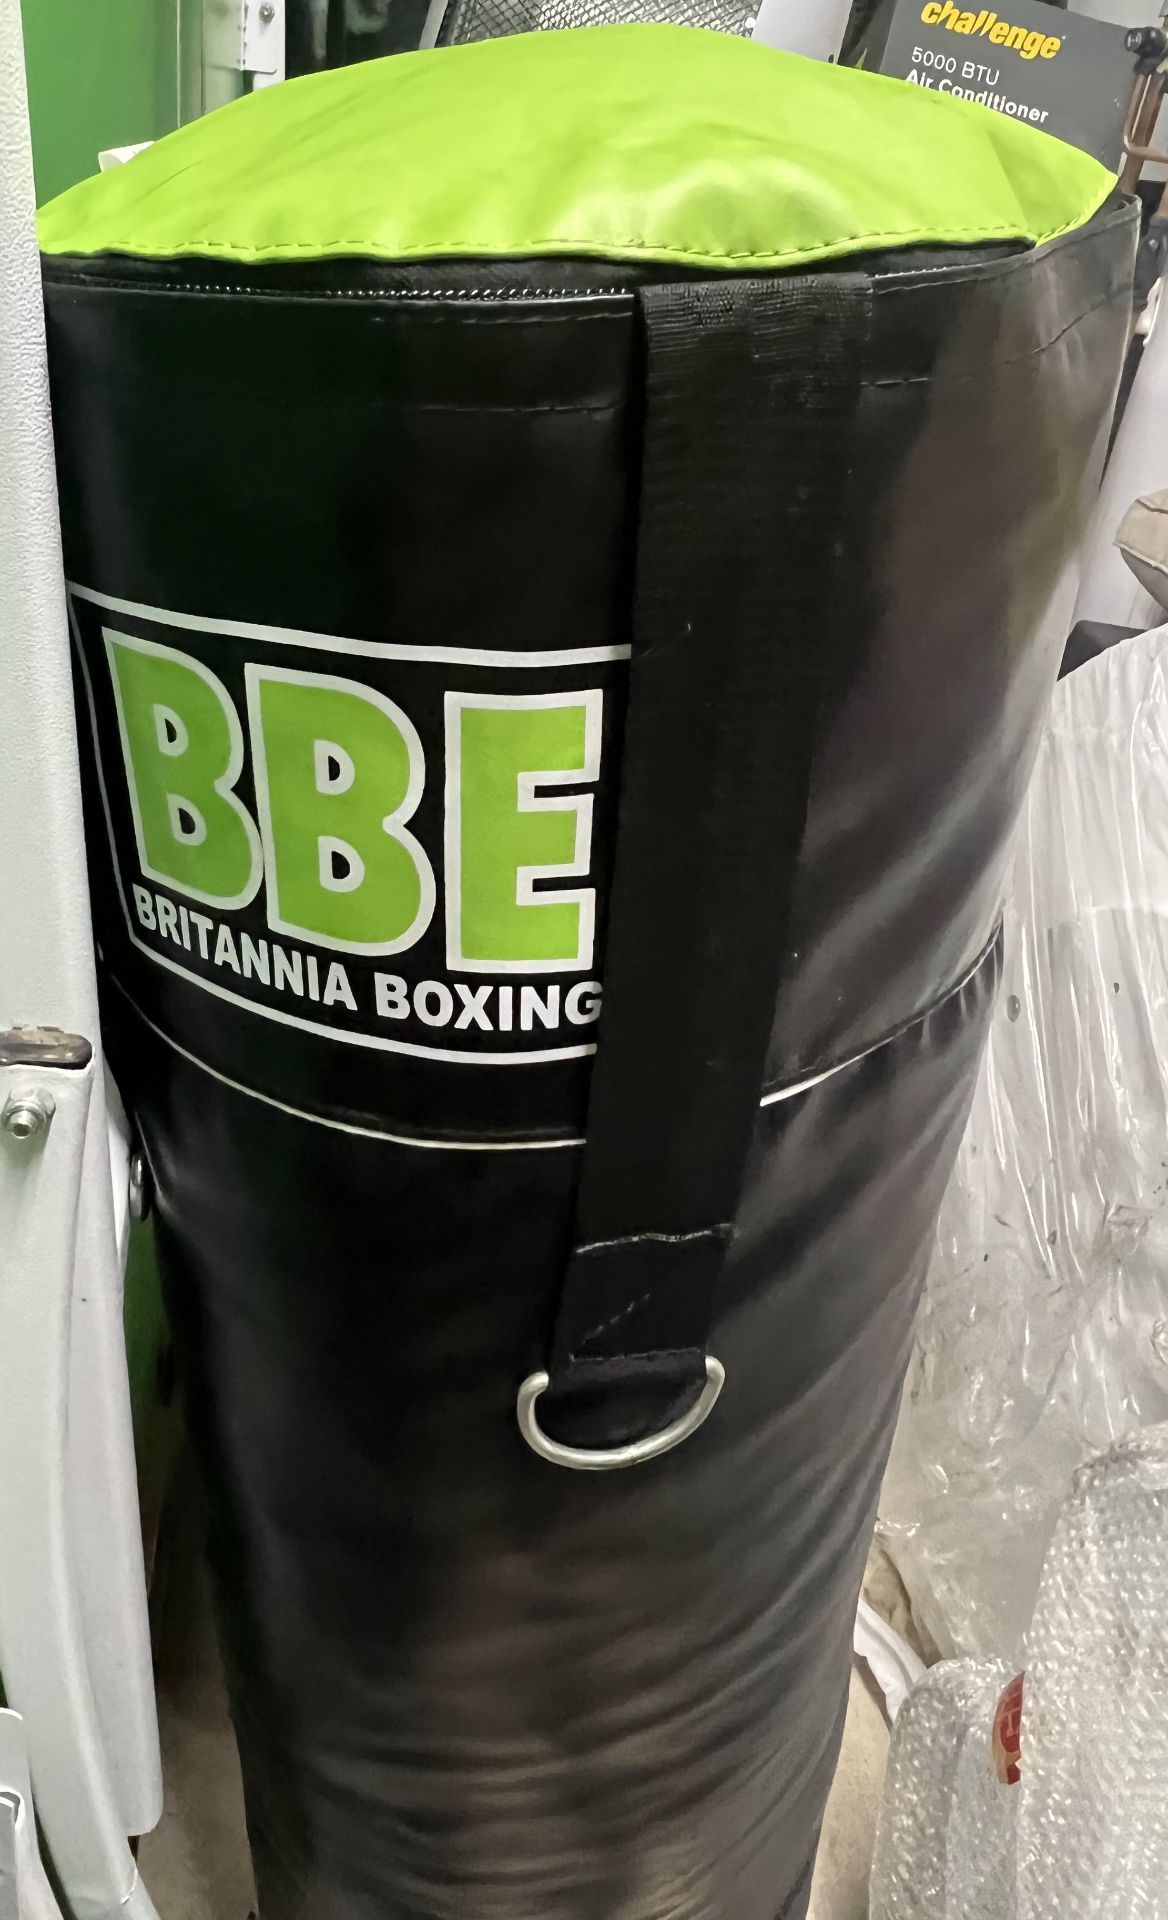 BBE Britannia Boxing Punch Bag - Great Condition